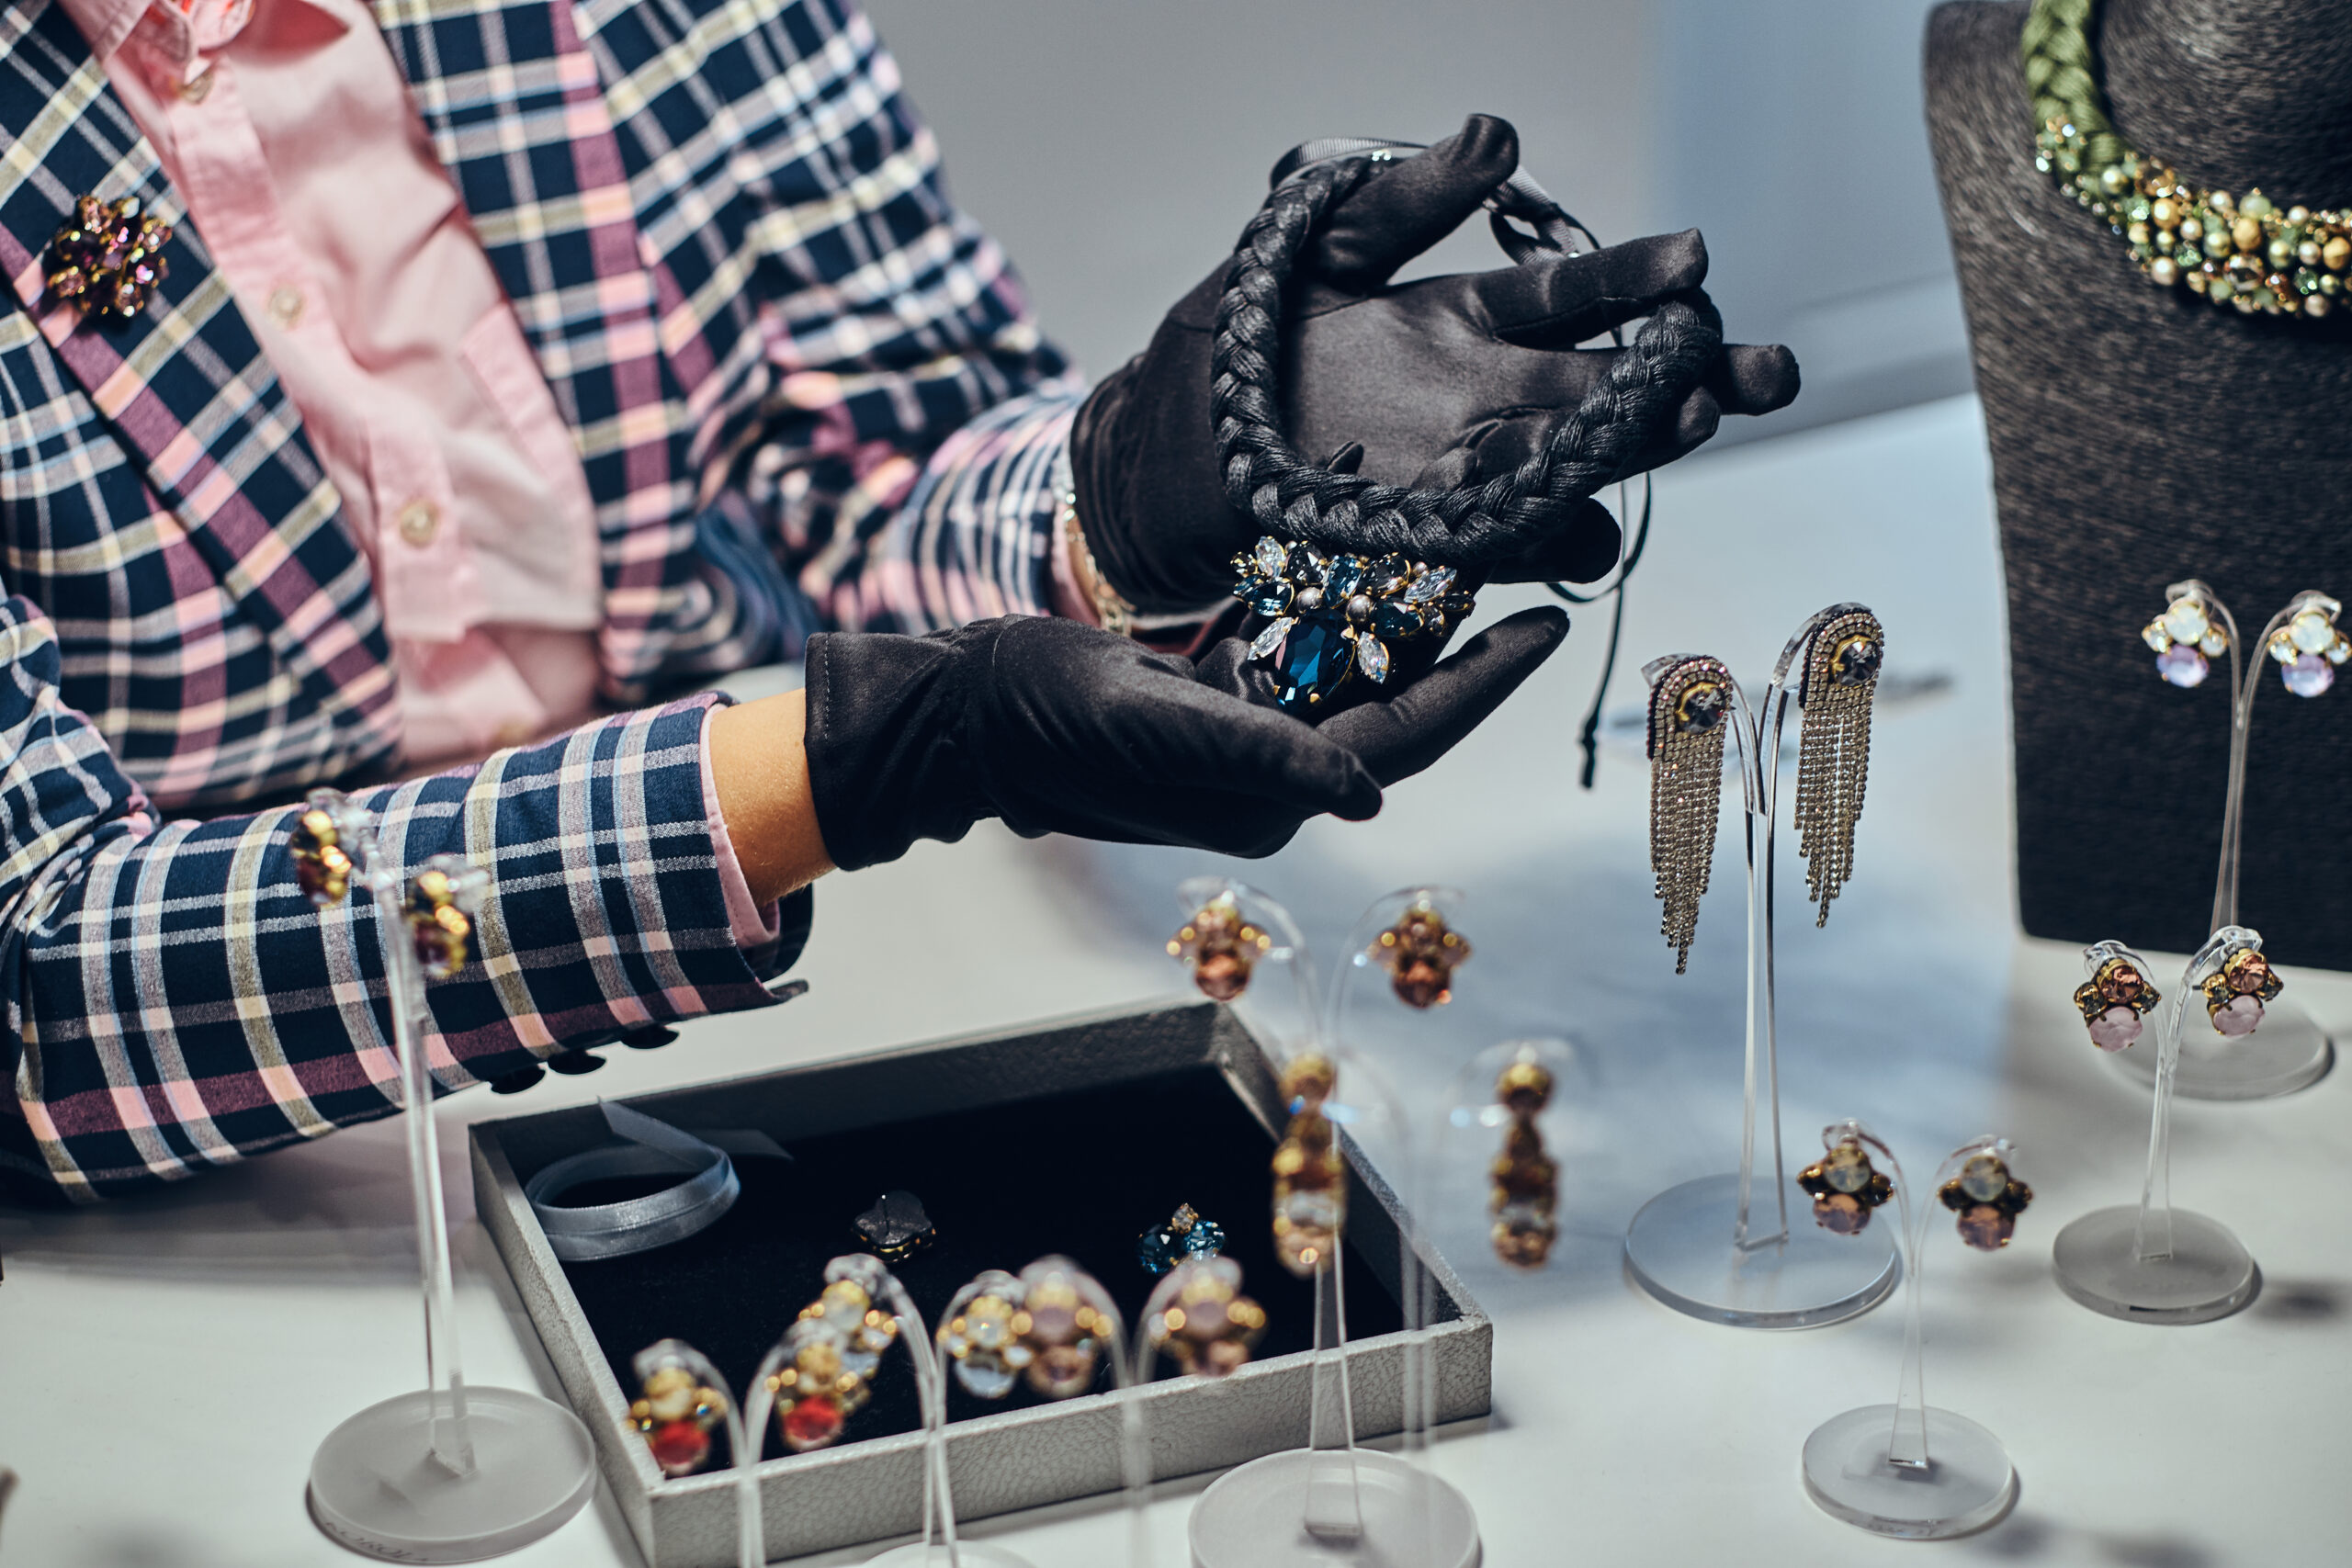 HOW TO START A JEWELLERY STORE BUSINESS IN NIGERIA